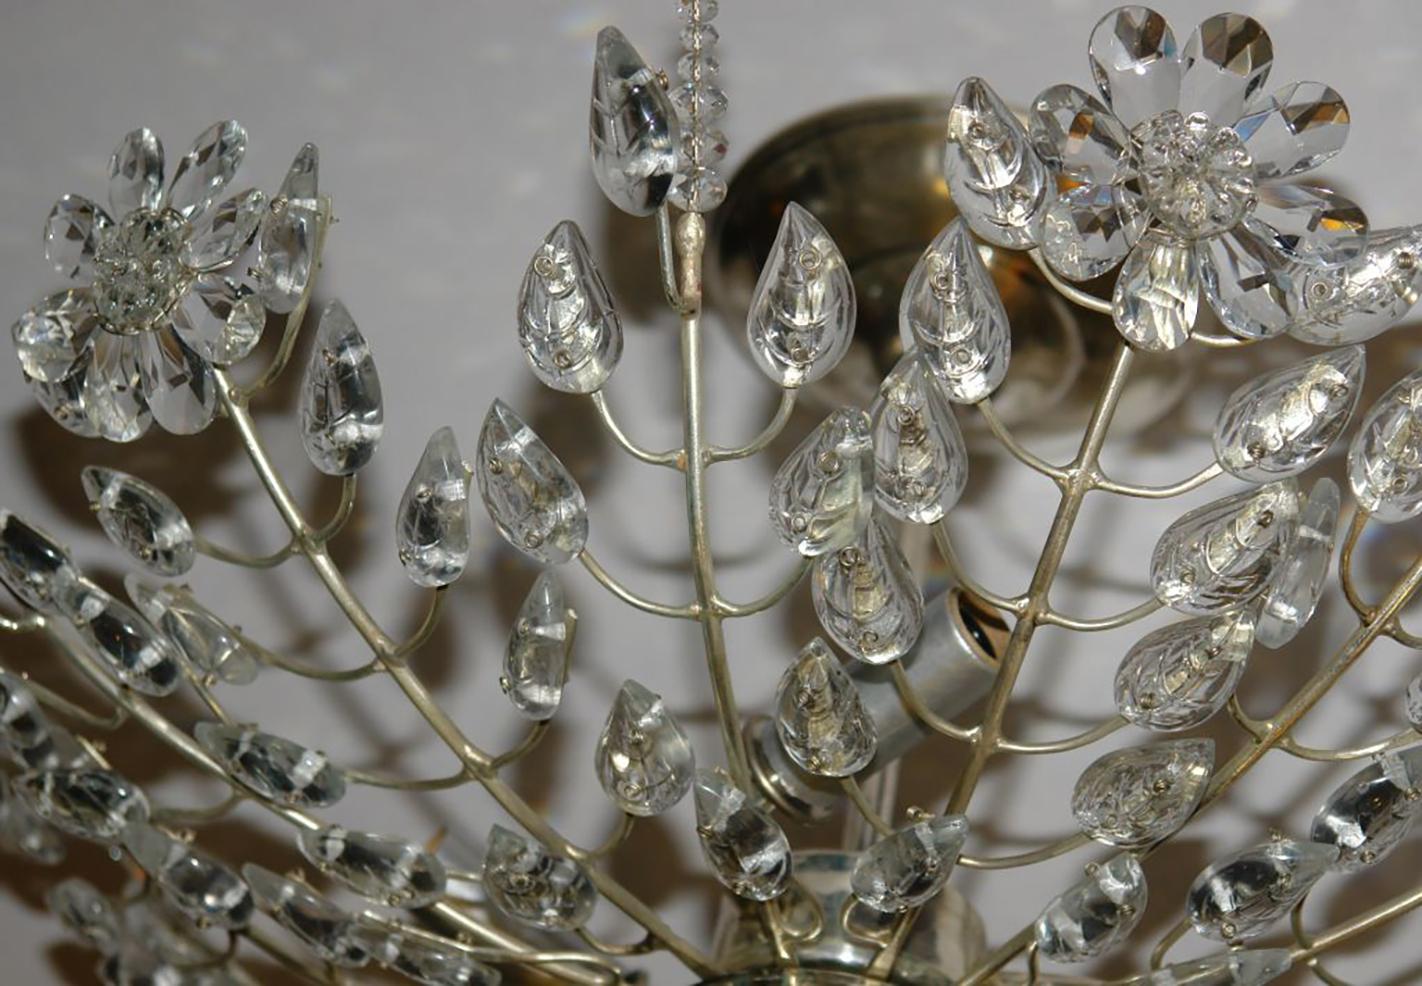 Pair of circa 1940’s French silver plated light fixtures with molded glass leaves and crystal flowers, mercury glass body and 3 interior lights. Sold individually.

Measurements:
Diameter: 18″
Current drop: 9.5″ 